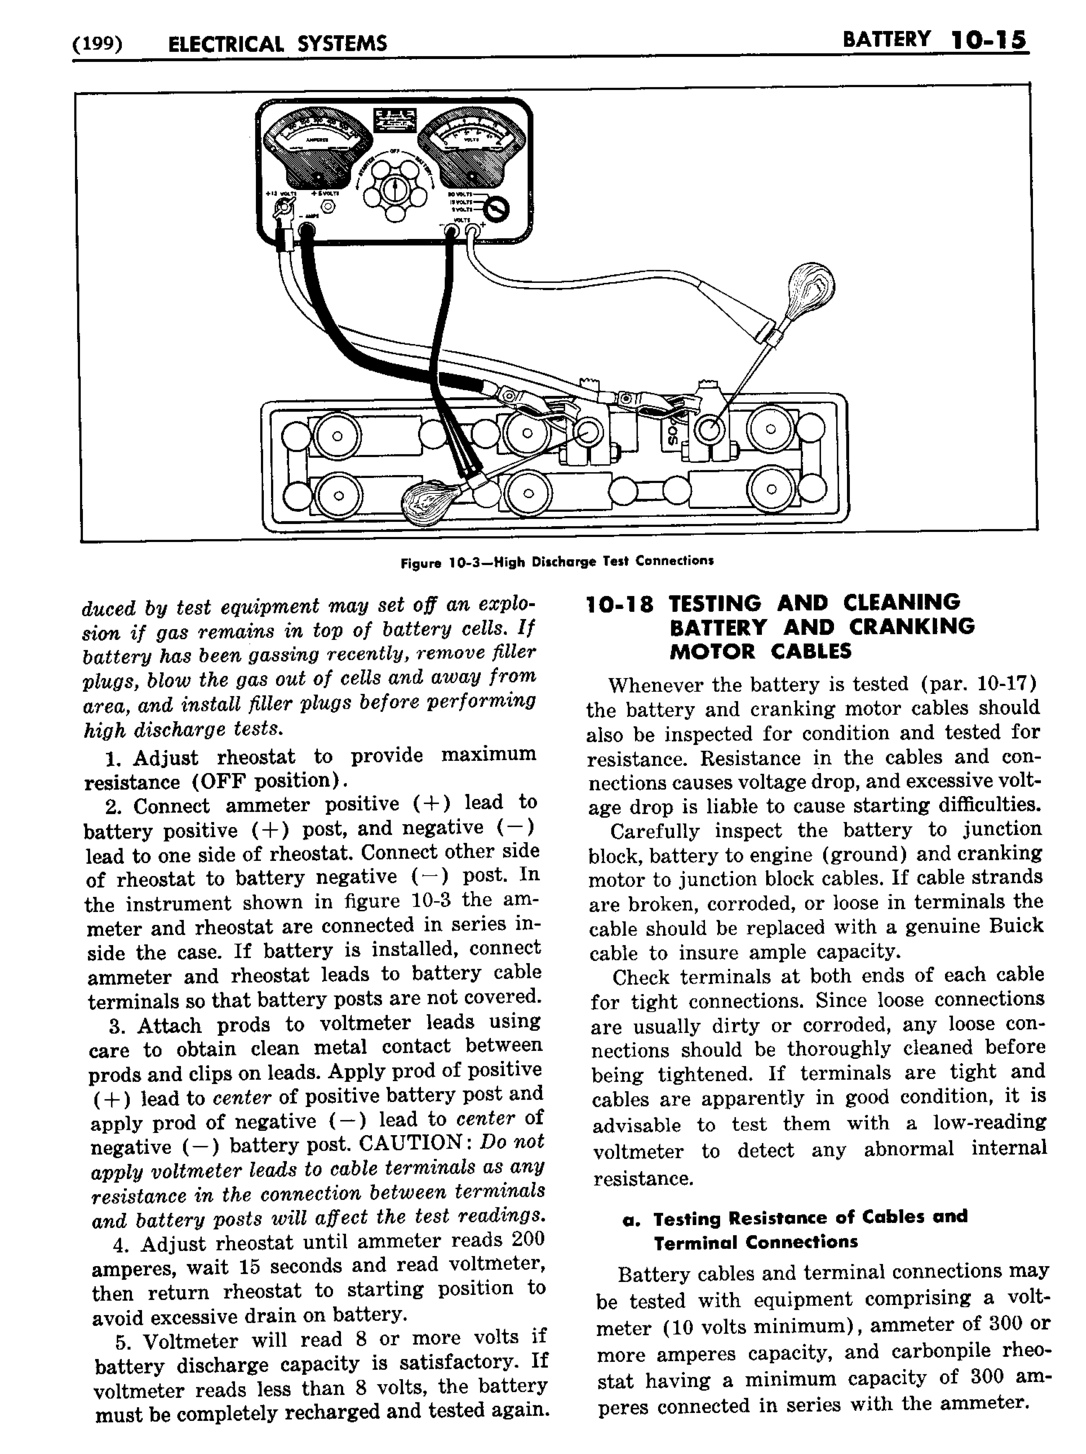 n_11 1953 Buick Shop Manual - Electrical Systems-015-015.jpg